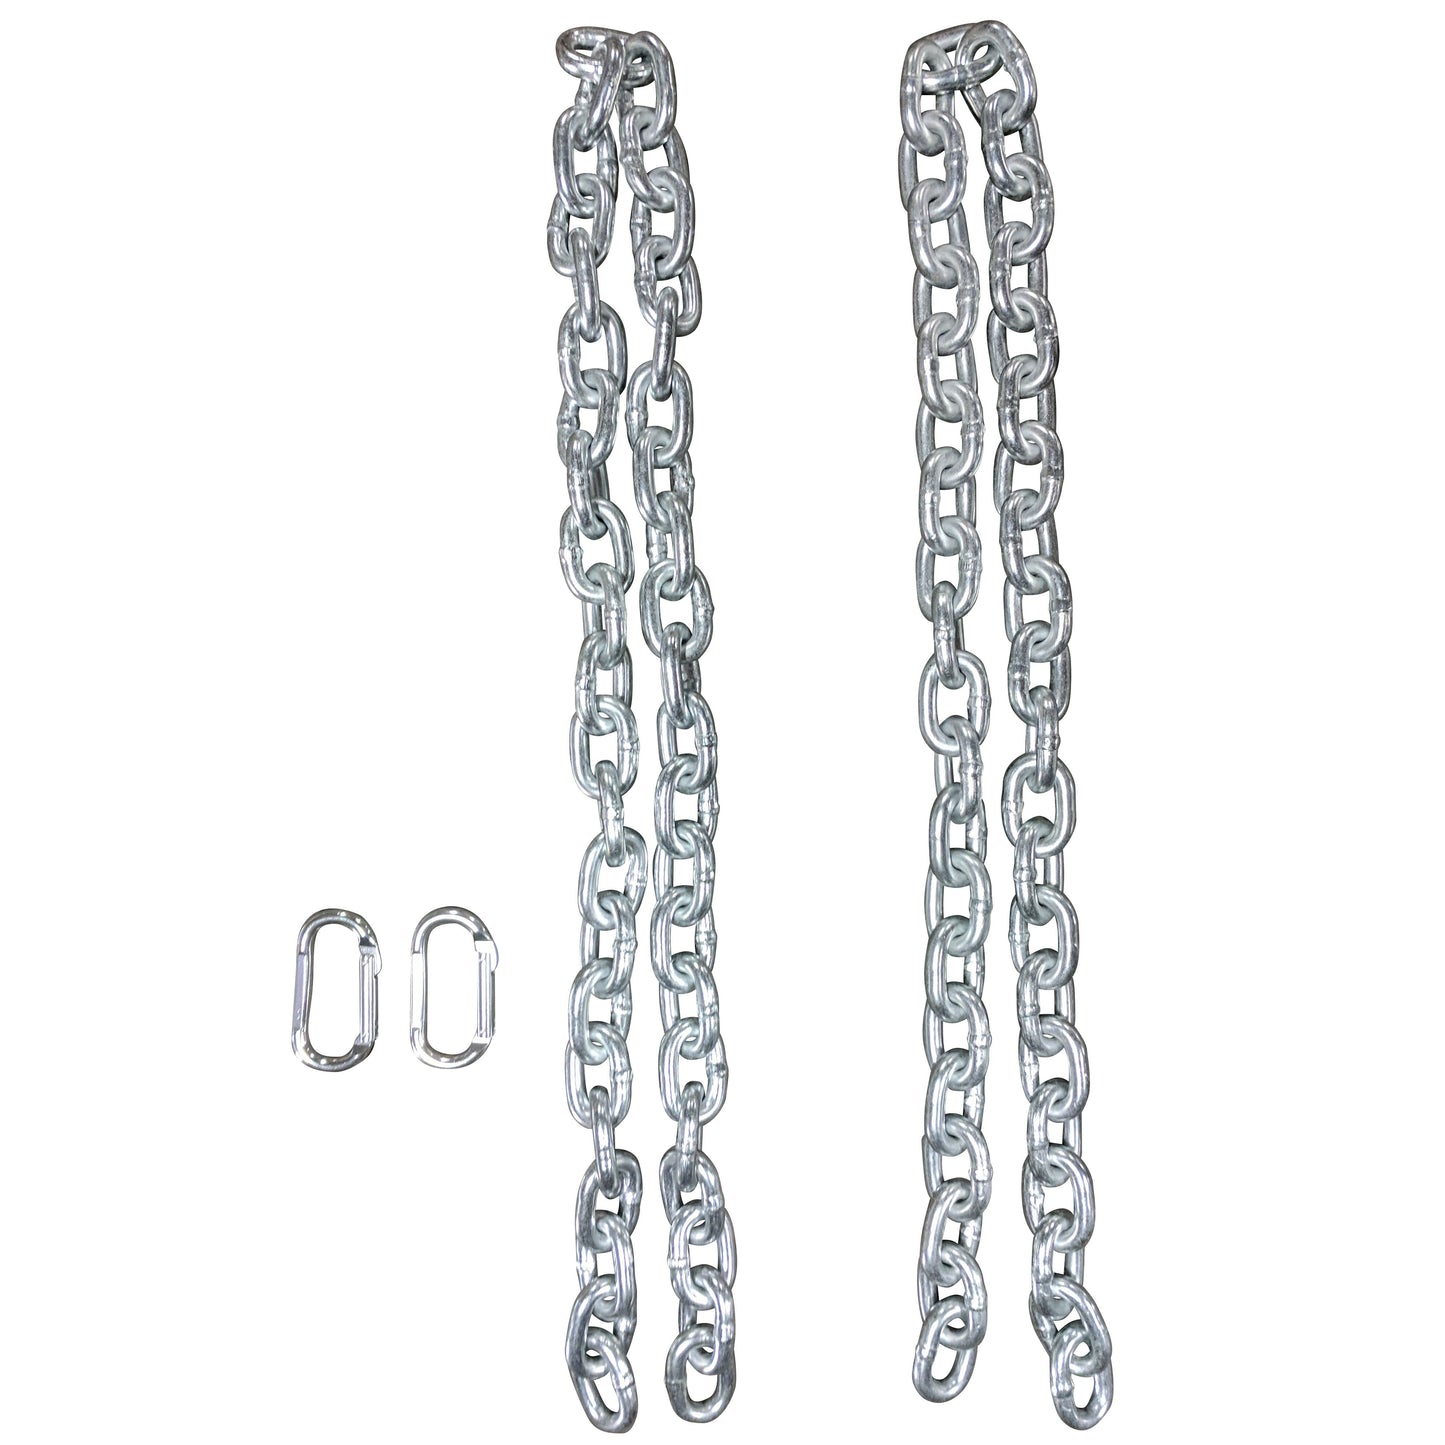 SCRATCH AND DENT - Pair of 6 ft 1/2" Weight Chains w/ Carabiner - FINAL SALE - view 1